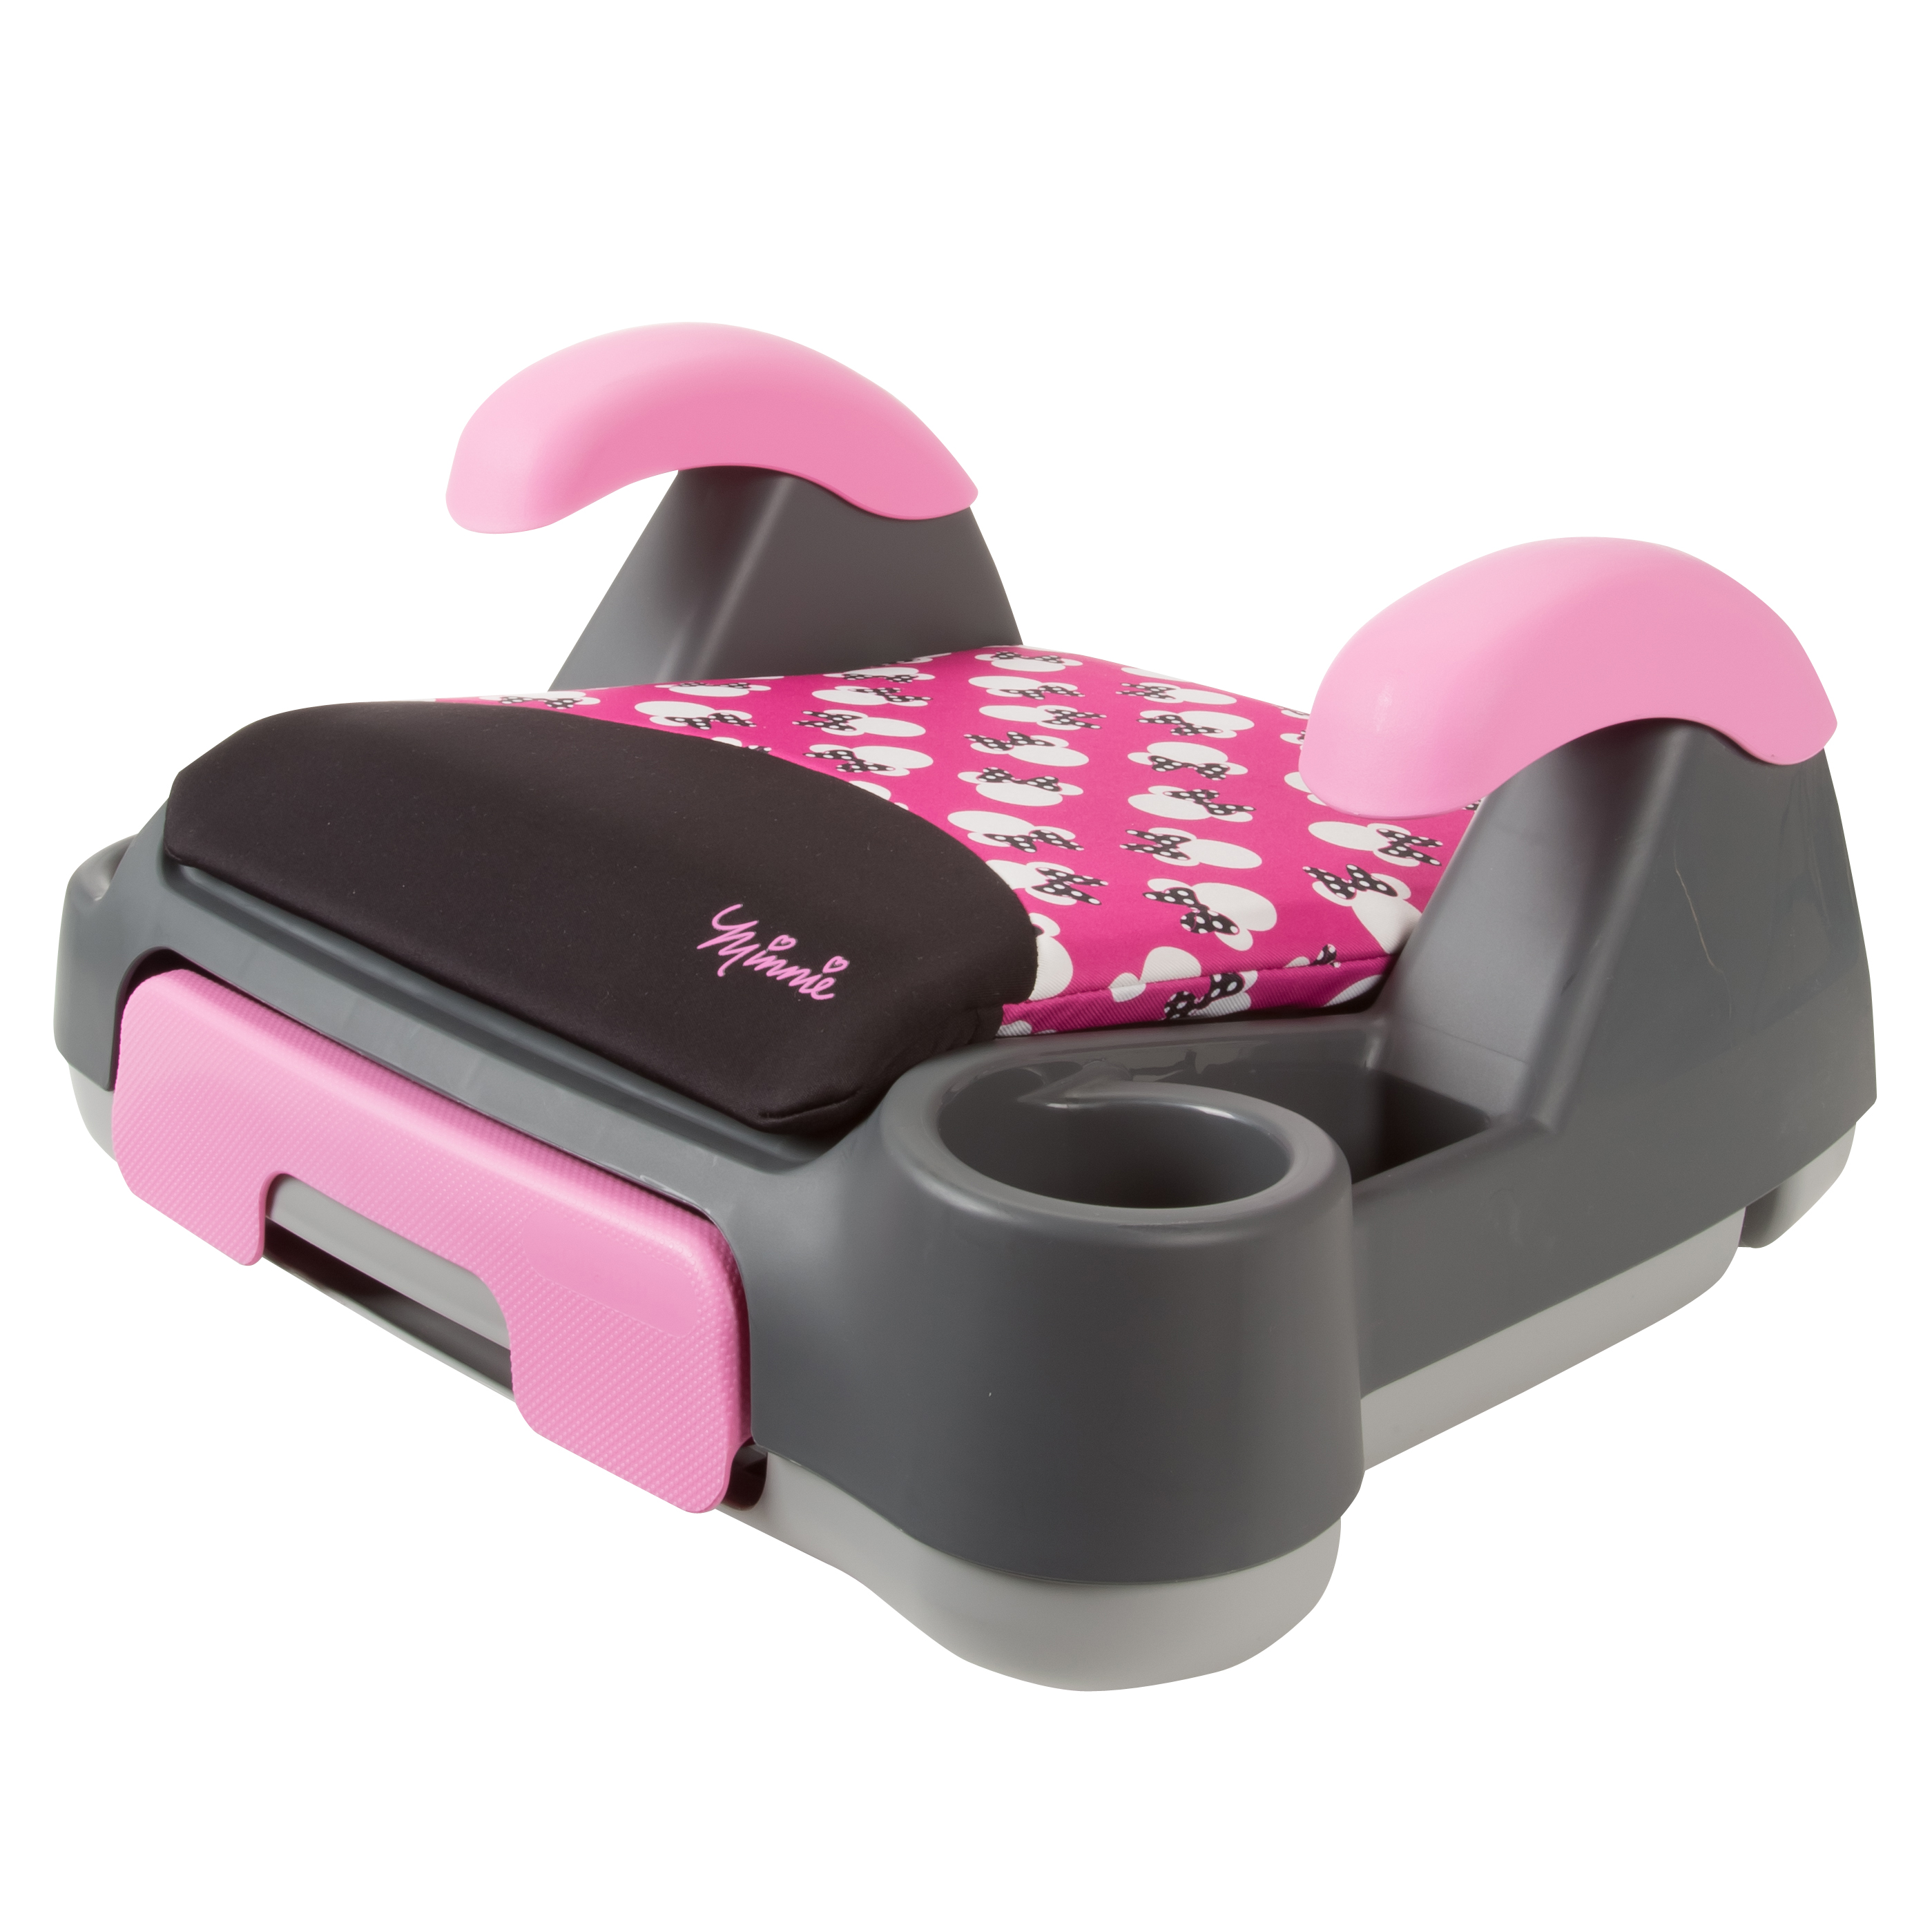 Disney Store 'n Go Backless Booster Car Seat, Minnie Silhouette Pink - image 1 of 7